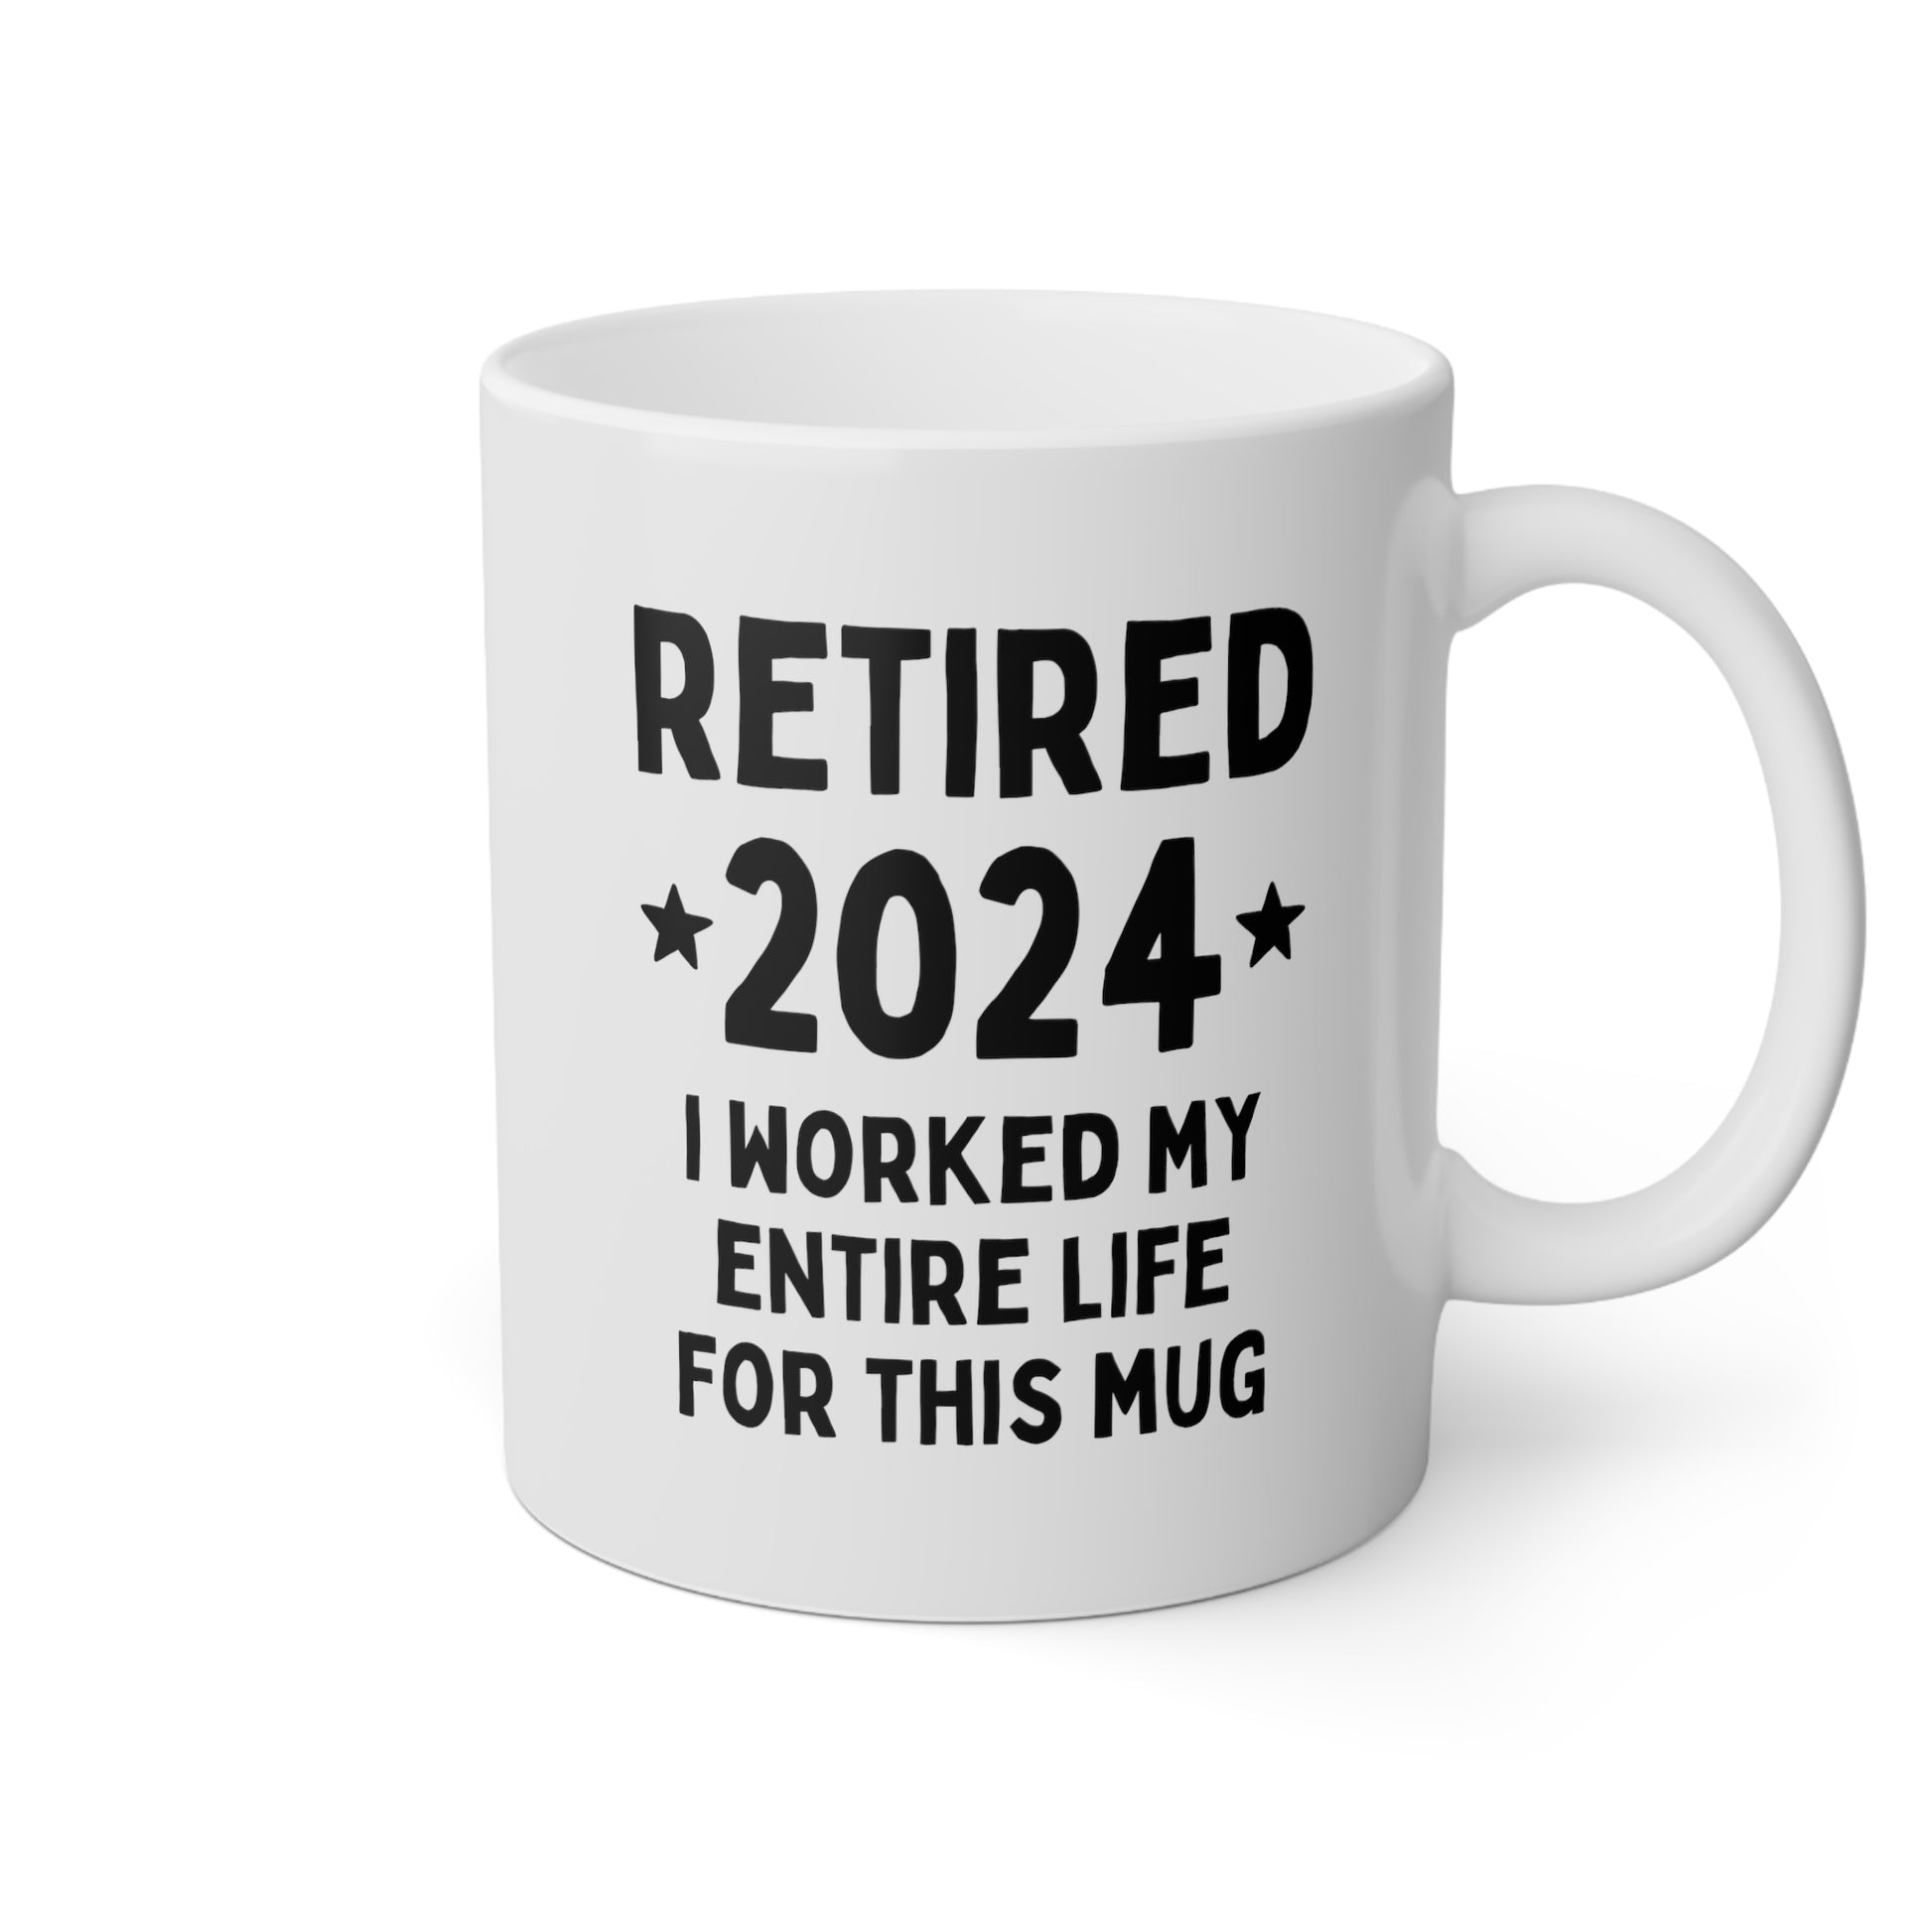 Retired 2024 I Worked My Entire Life For This Mug 11oz white funny large coffee mug gift for retirement man woman waveywares wavey wares wavywares wavy wares